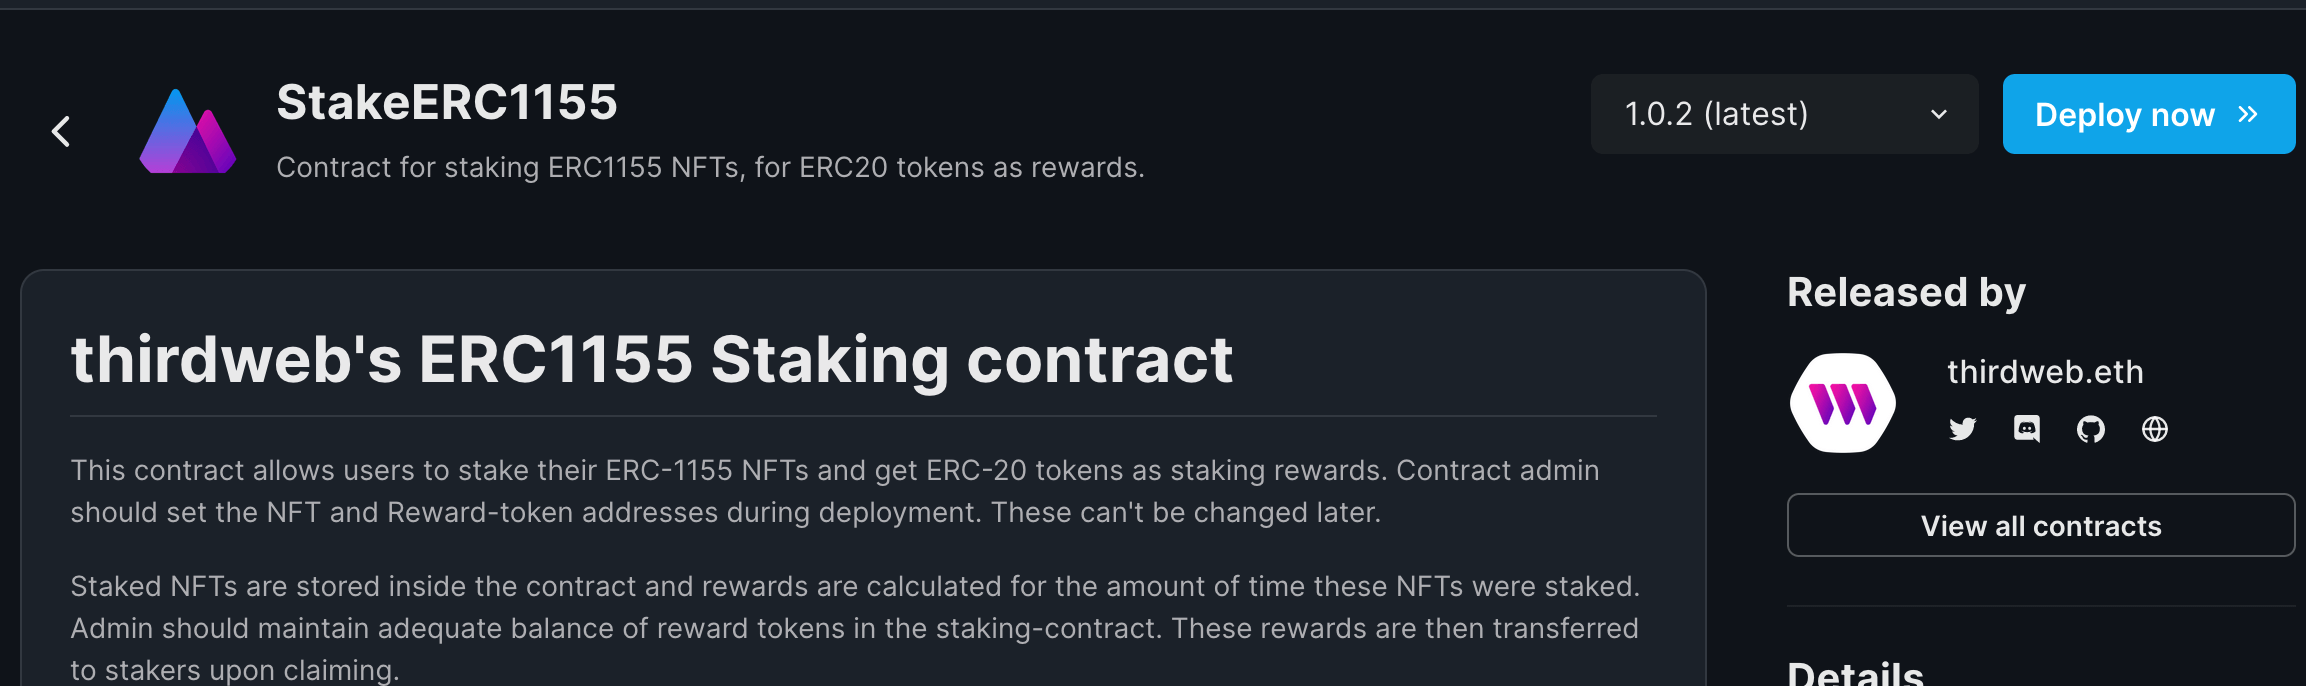 Deploy the StakeERC1155 contract